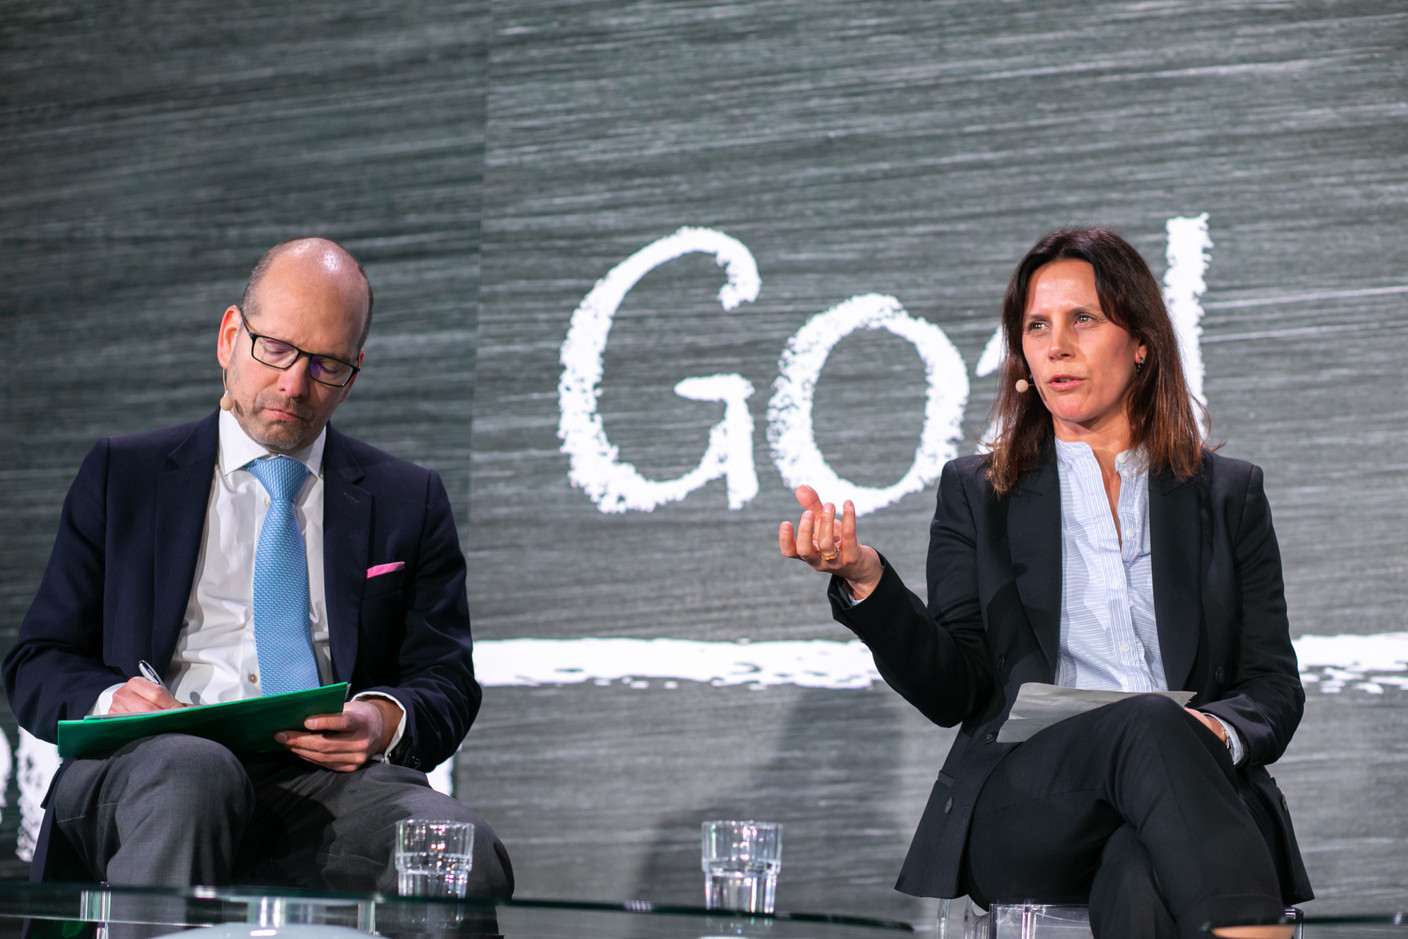 Jean-Marc Goy, Capital Group, and Emily Smart, Abrdn are seen during the “Improving value for investors: is drastic change needed for success?” panel at Alfi’s European Asset Management Conference, 22 March 2023. Photo: Matic Zorman / Maison Moderne